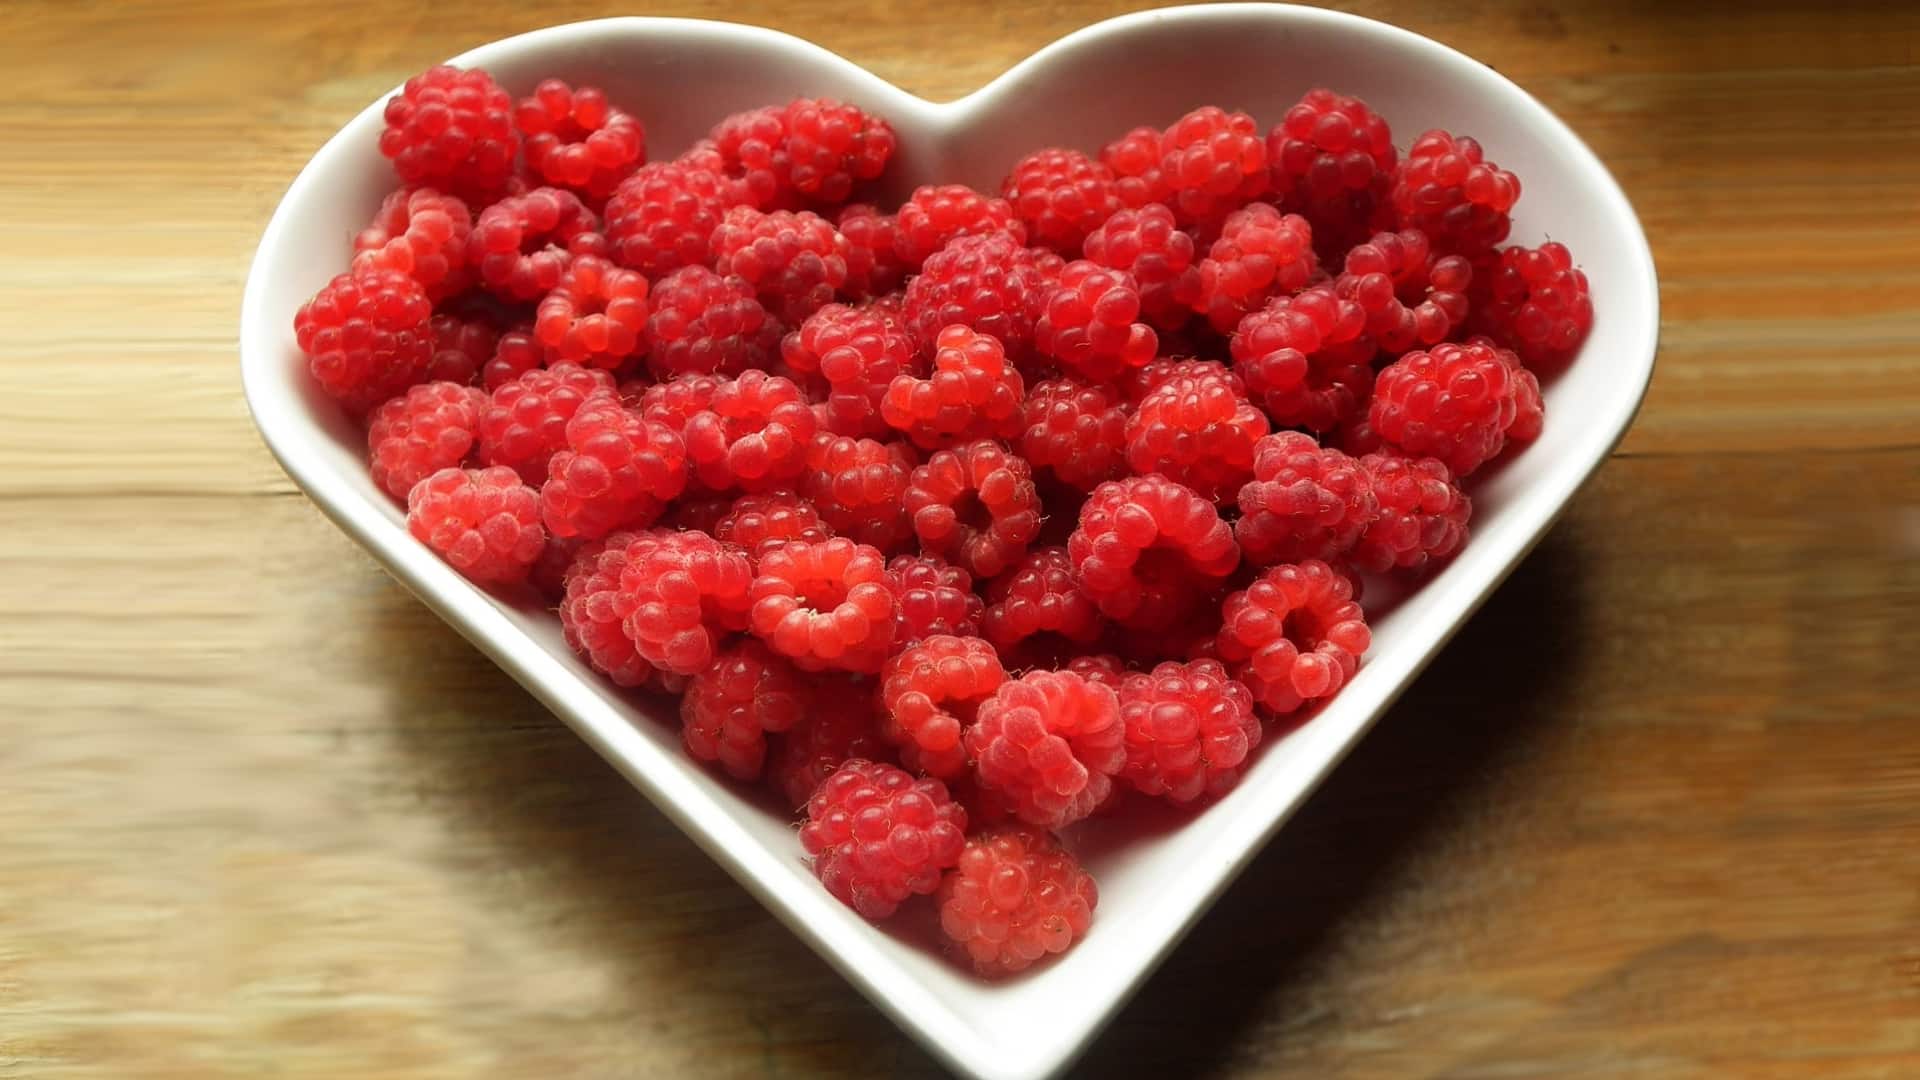 berries | Health Topics | NutritionFacts.org